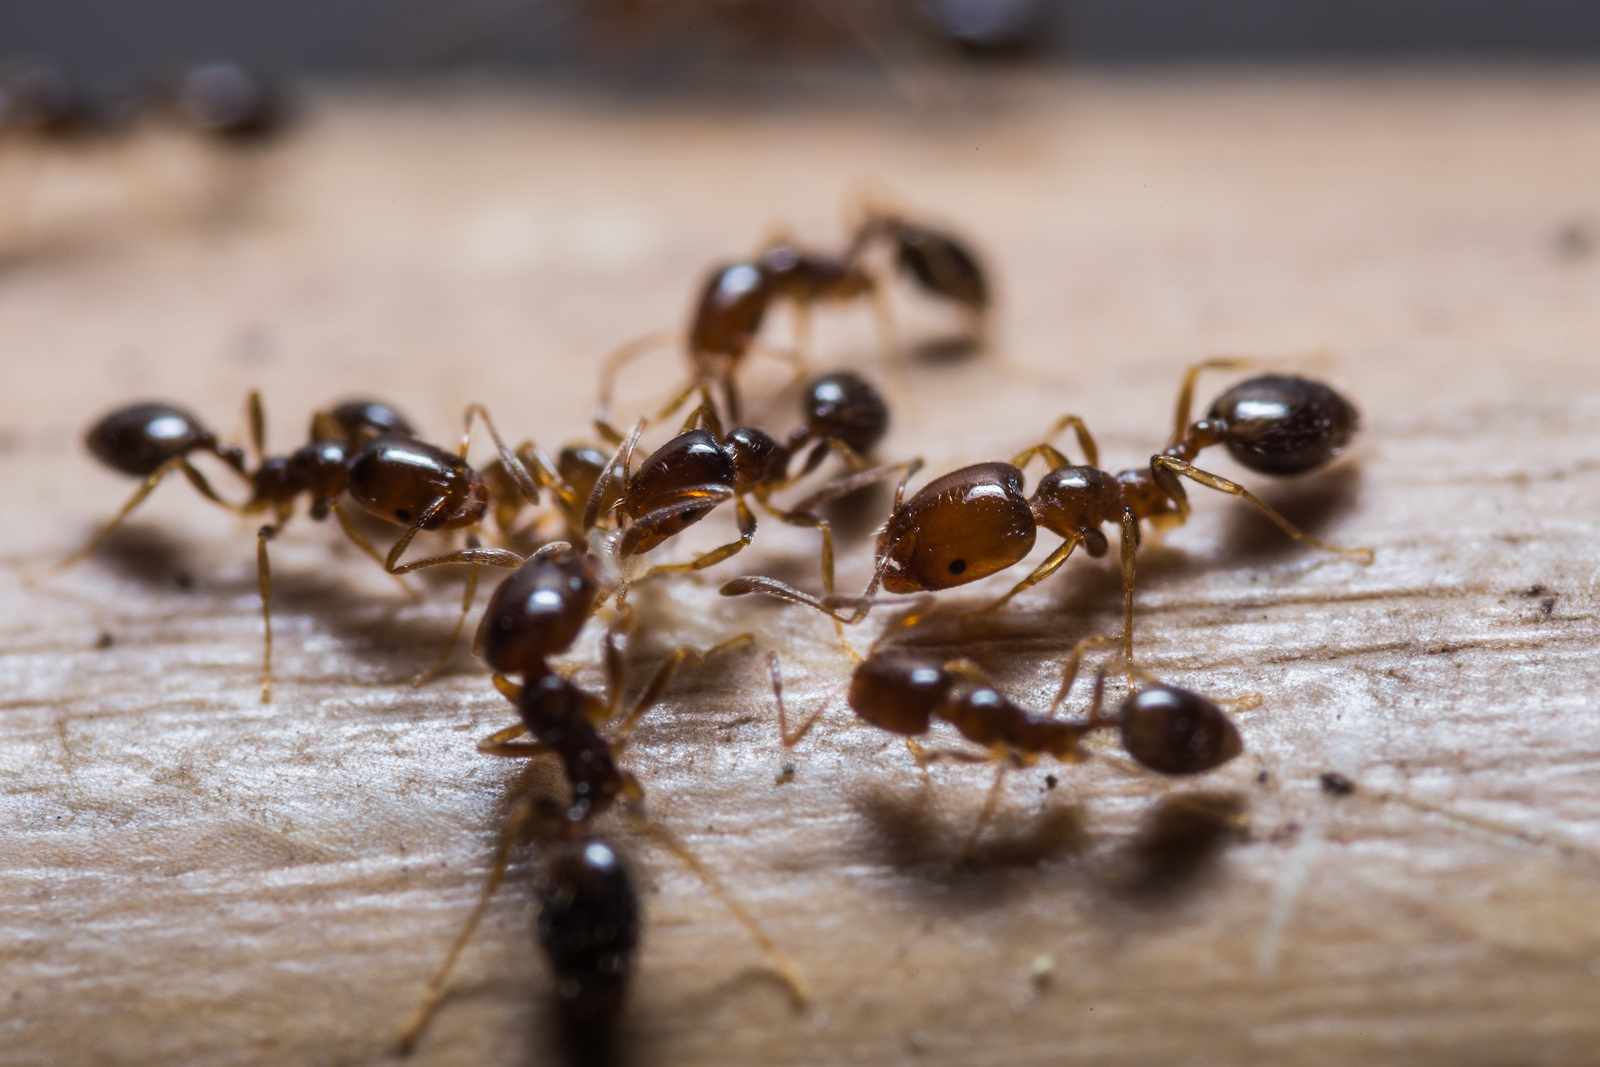 homemade-ant-repellers-How-to-get-rid-of-ants-in-the-kitchen--protecting-home-from-ants 